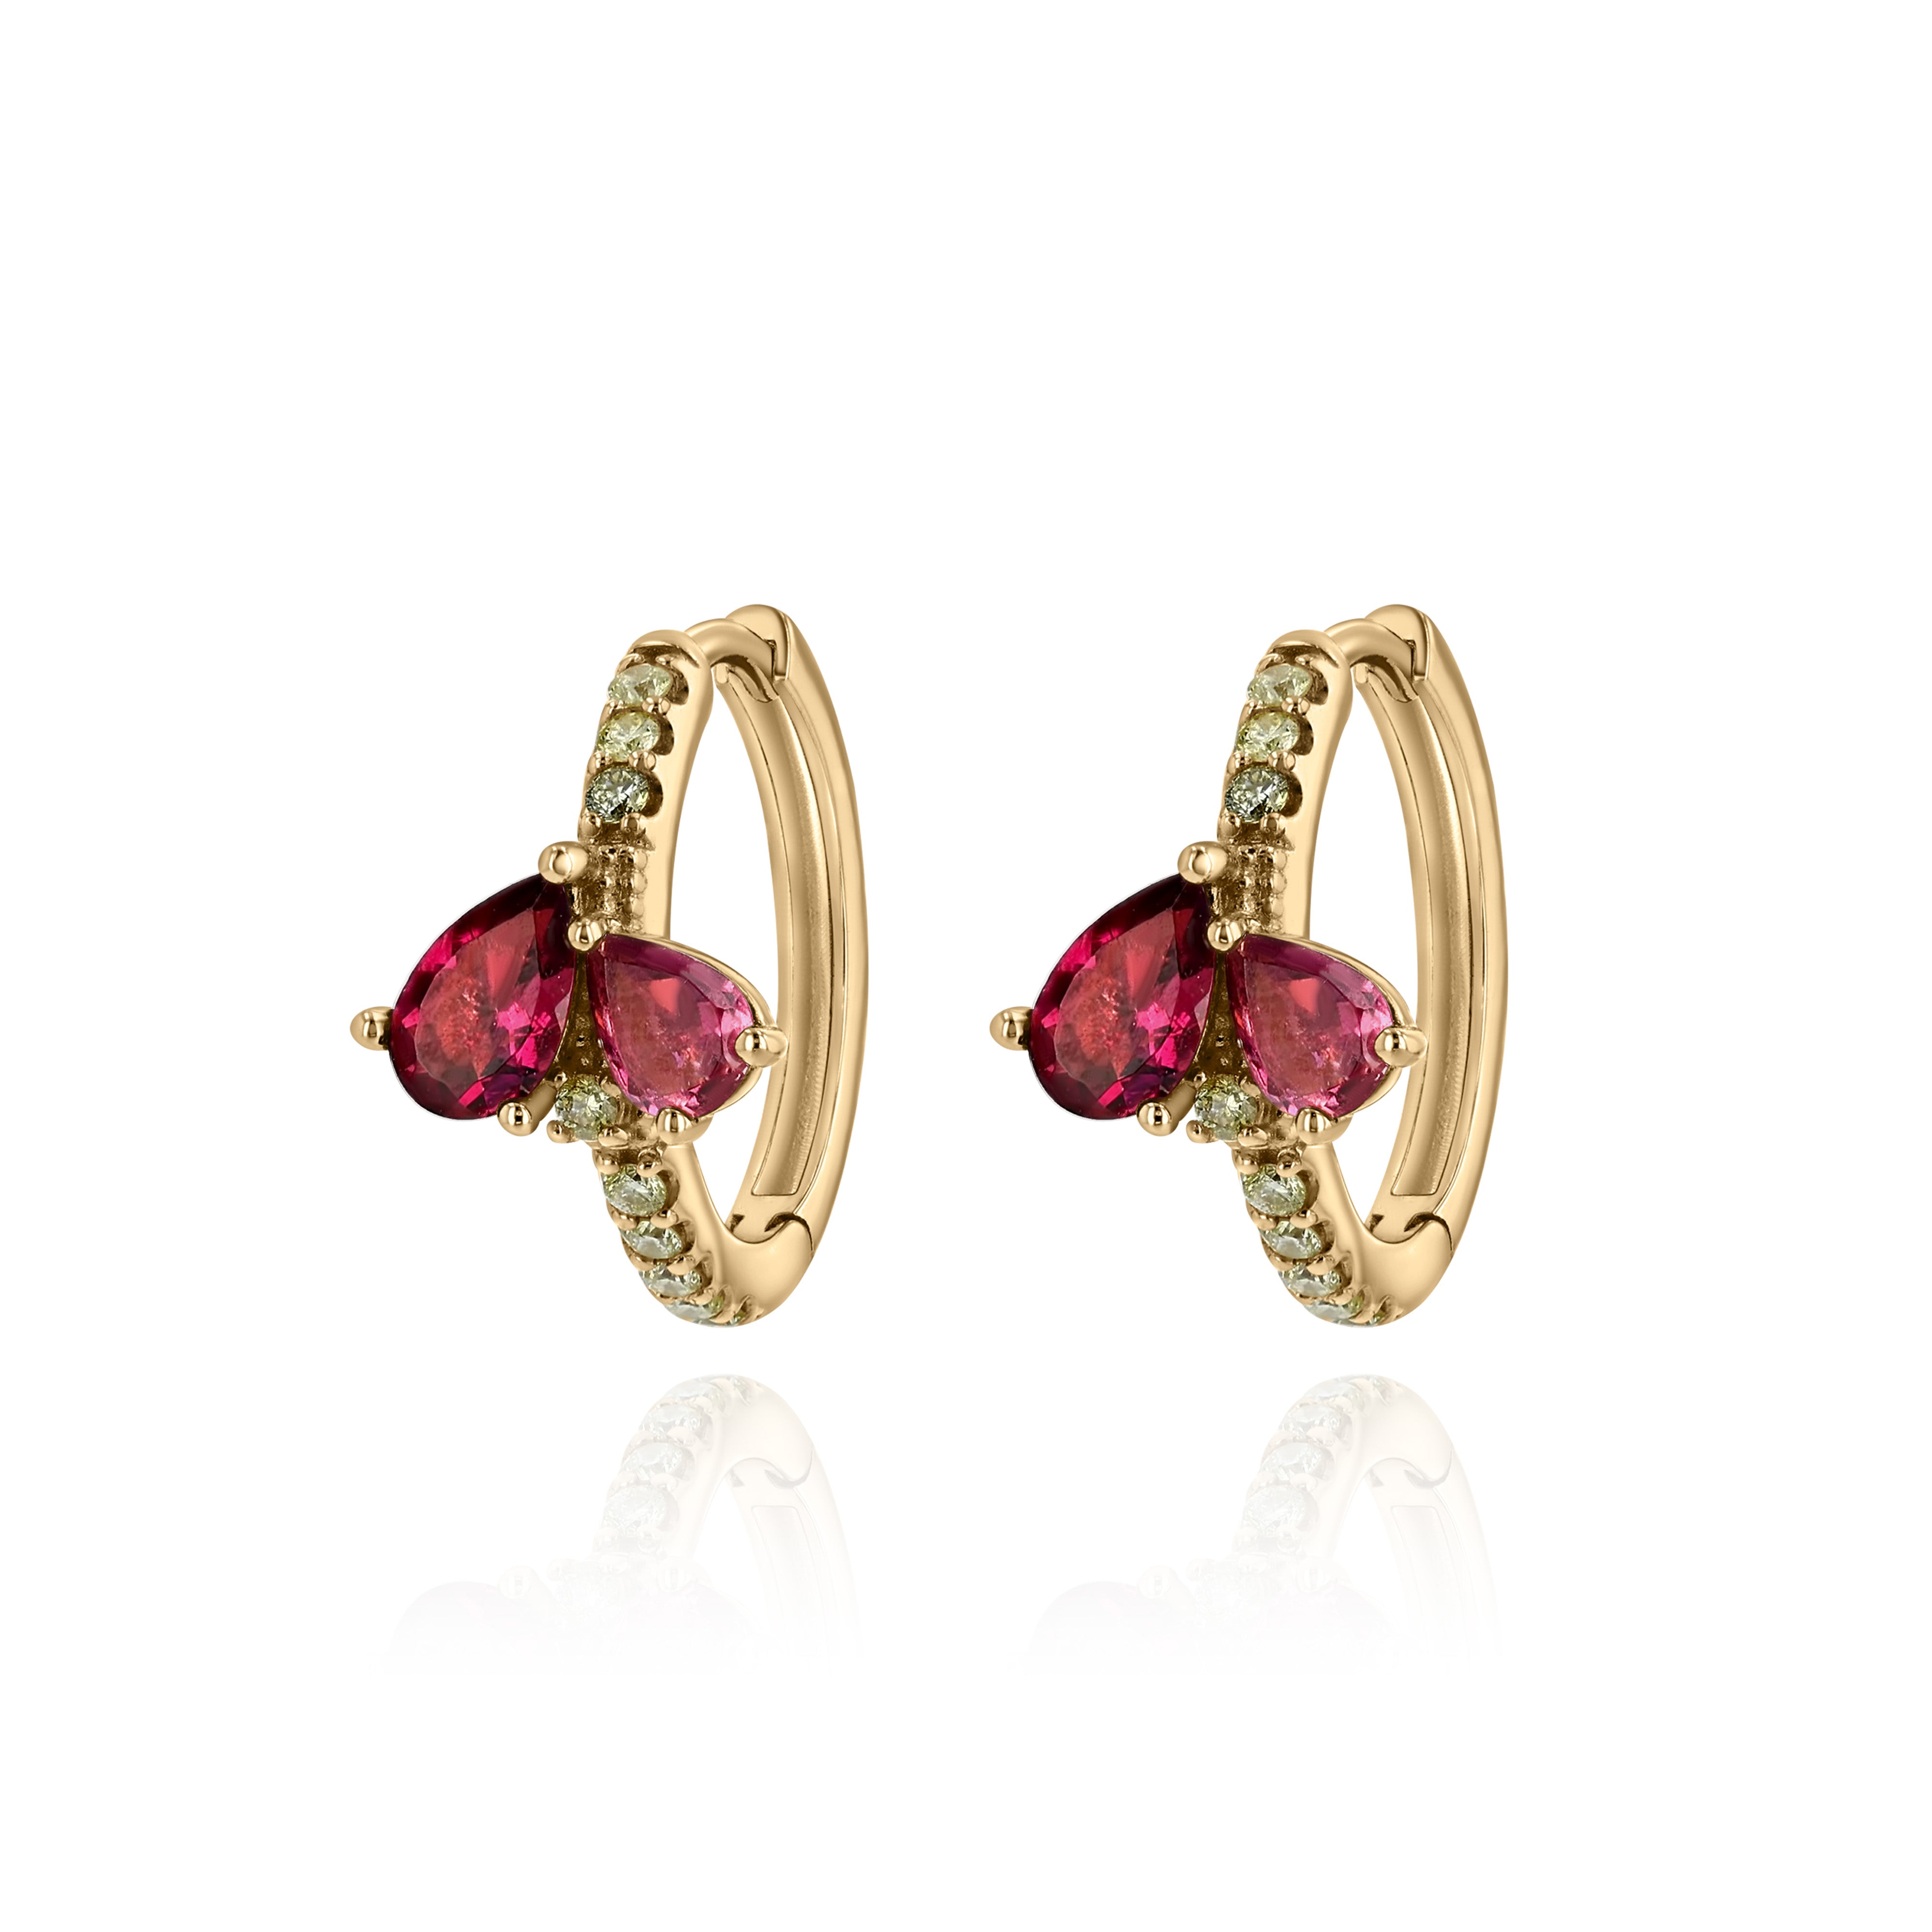 Yellow Gold hoop Earrings with pear shaped Rubellite, and small round Diamonds, Medium